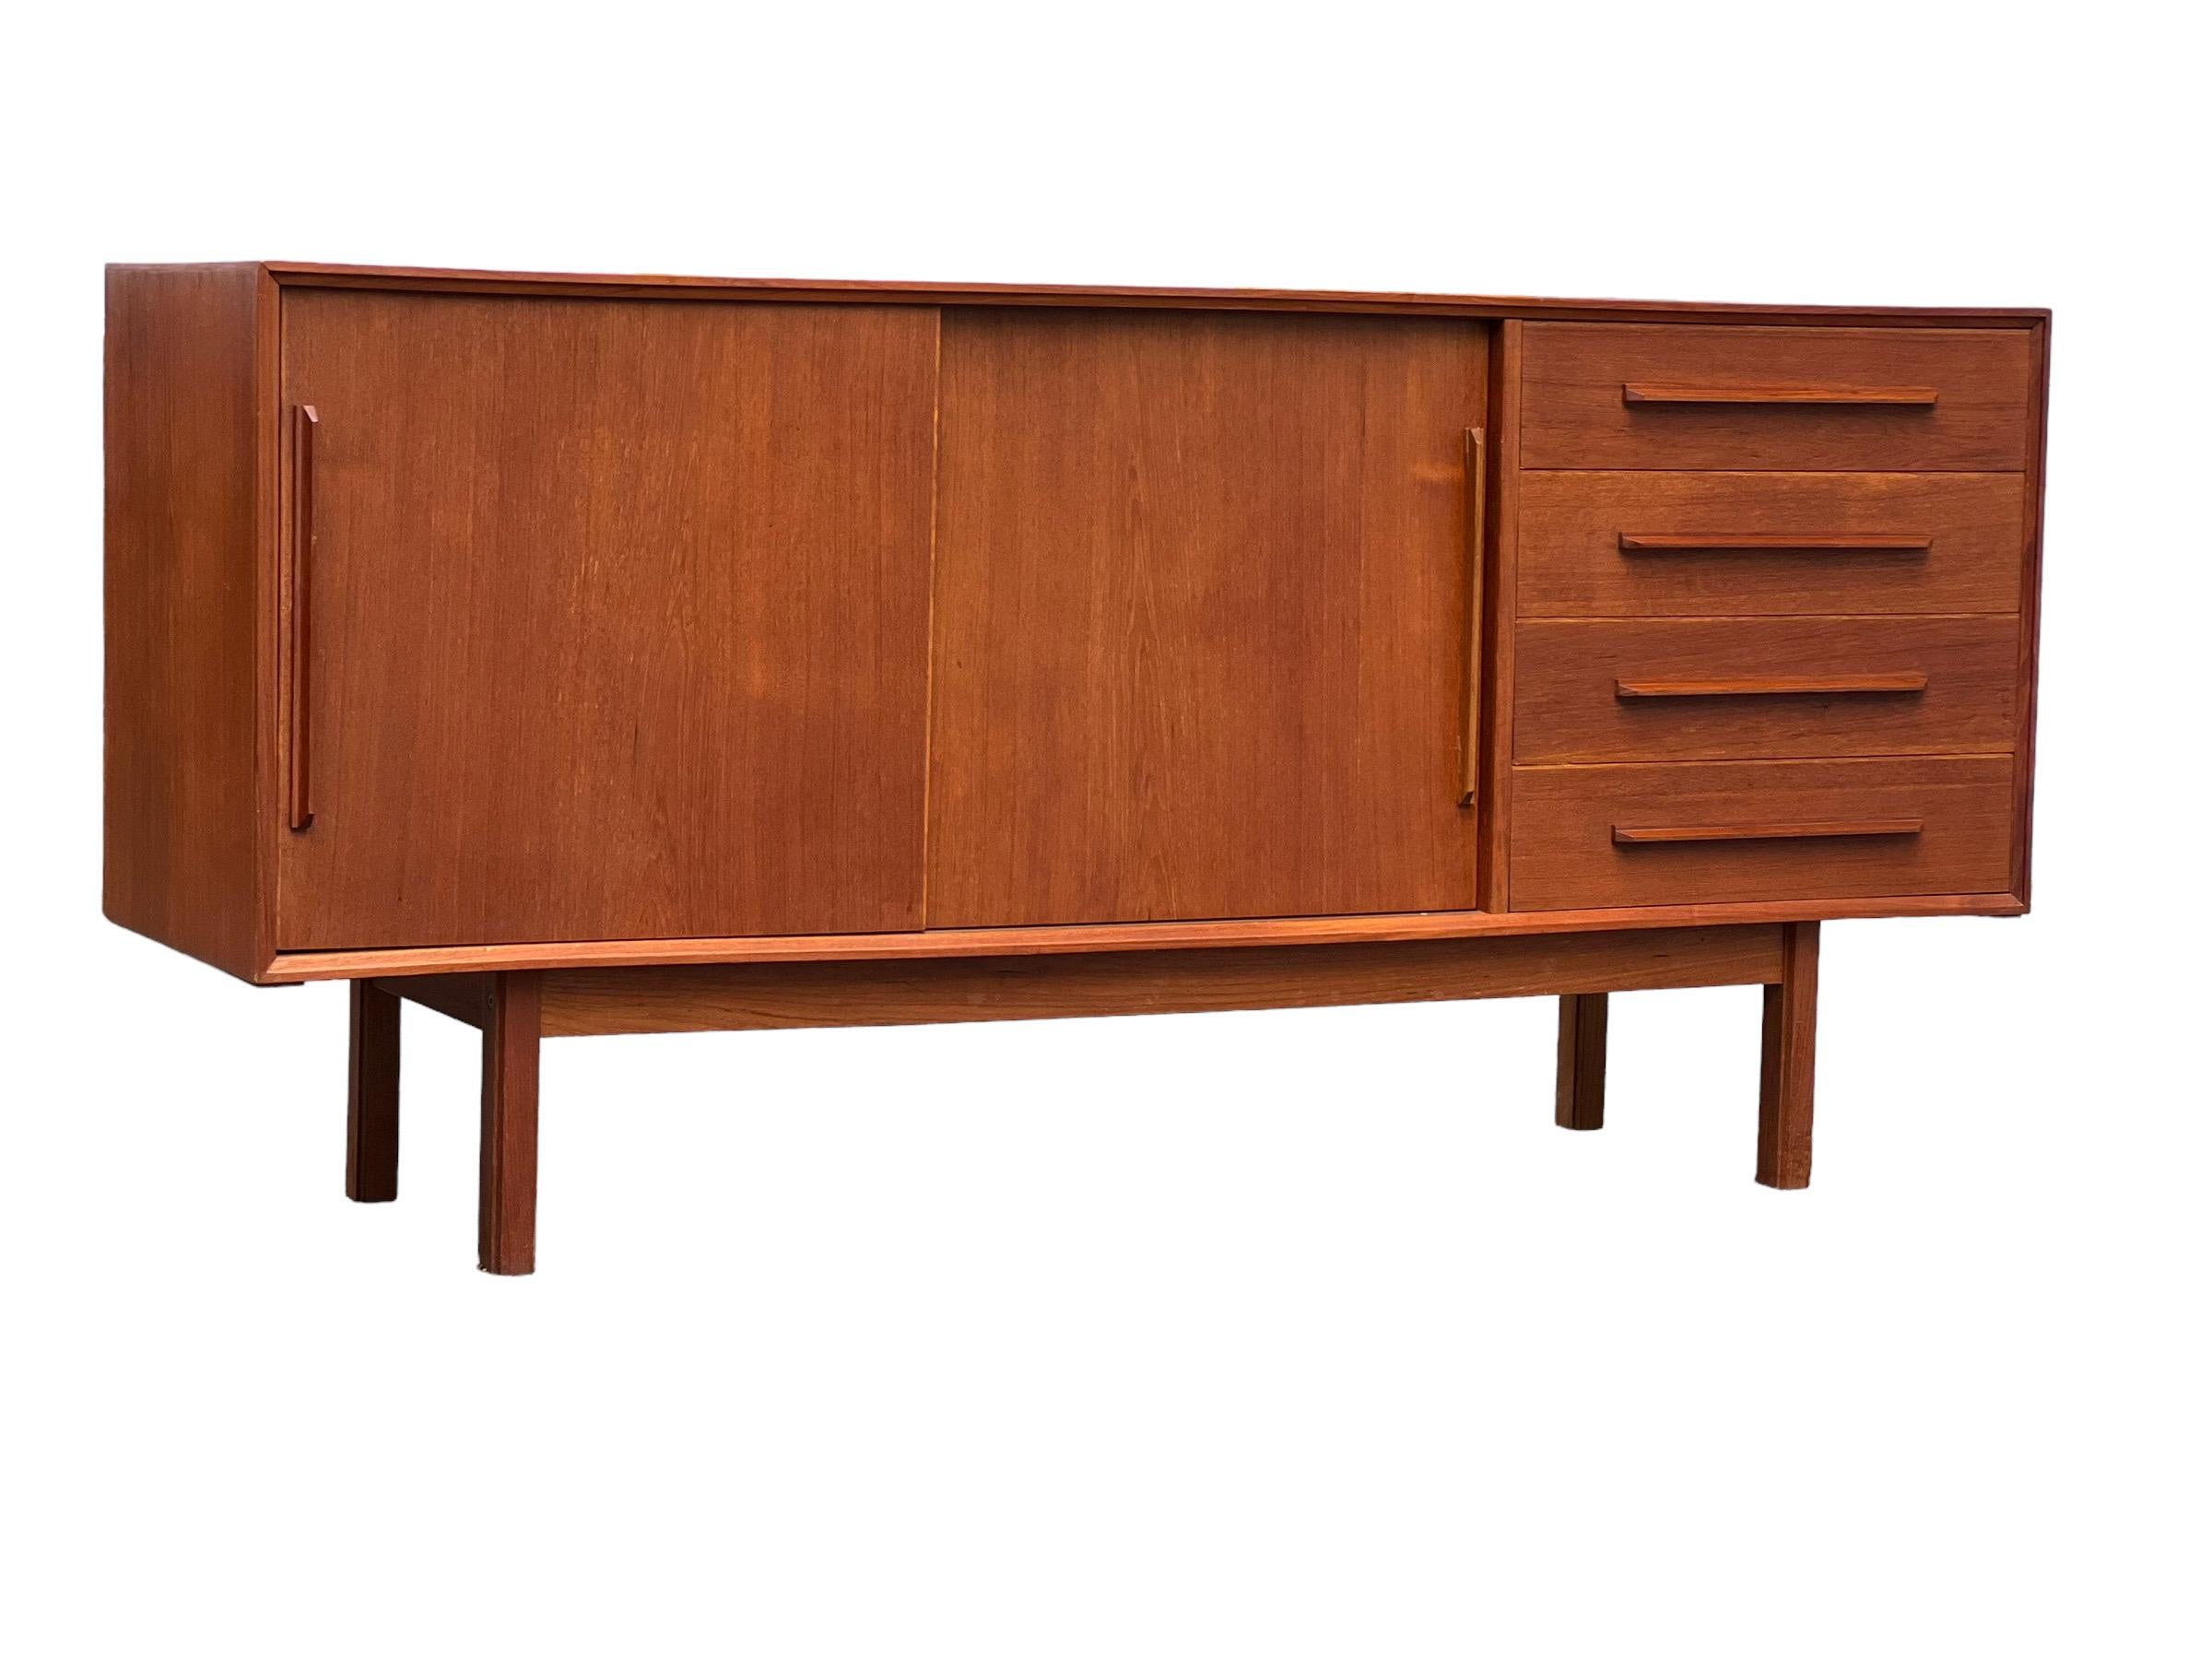 Vintage Danish Mid Century Modern Credenza or Media Stand Anne Vodder Style  In Good Condition For Sale In Seattle, WA